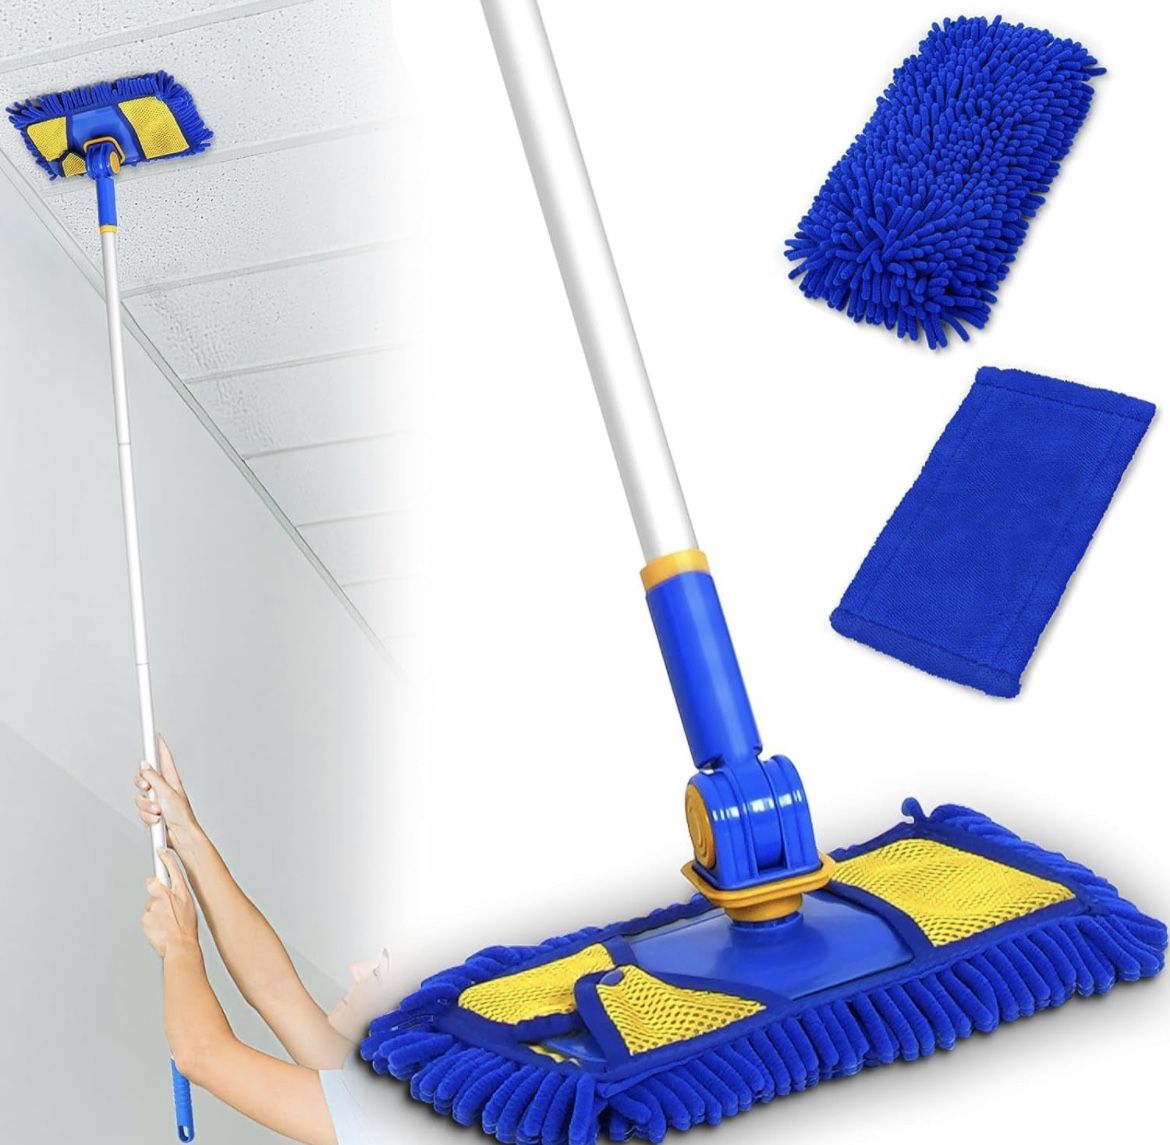 Wall Cleaner Mop with Long Handle, Wall Dust Cleaning Mop for Washing Walls with 2 Microfiber Reusable Mop Pads,Dry Dust and Wet Wash Cleaning Mop for